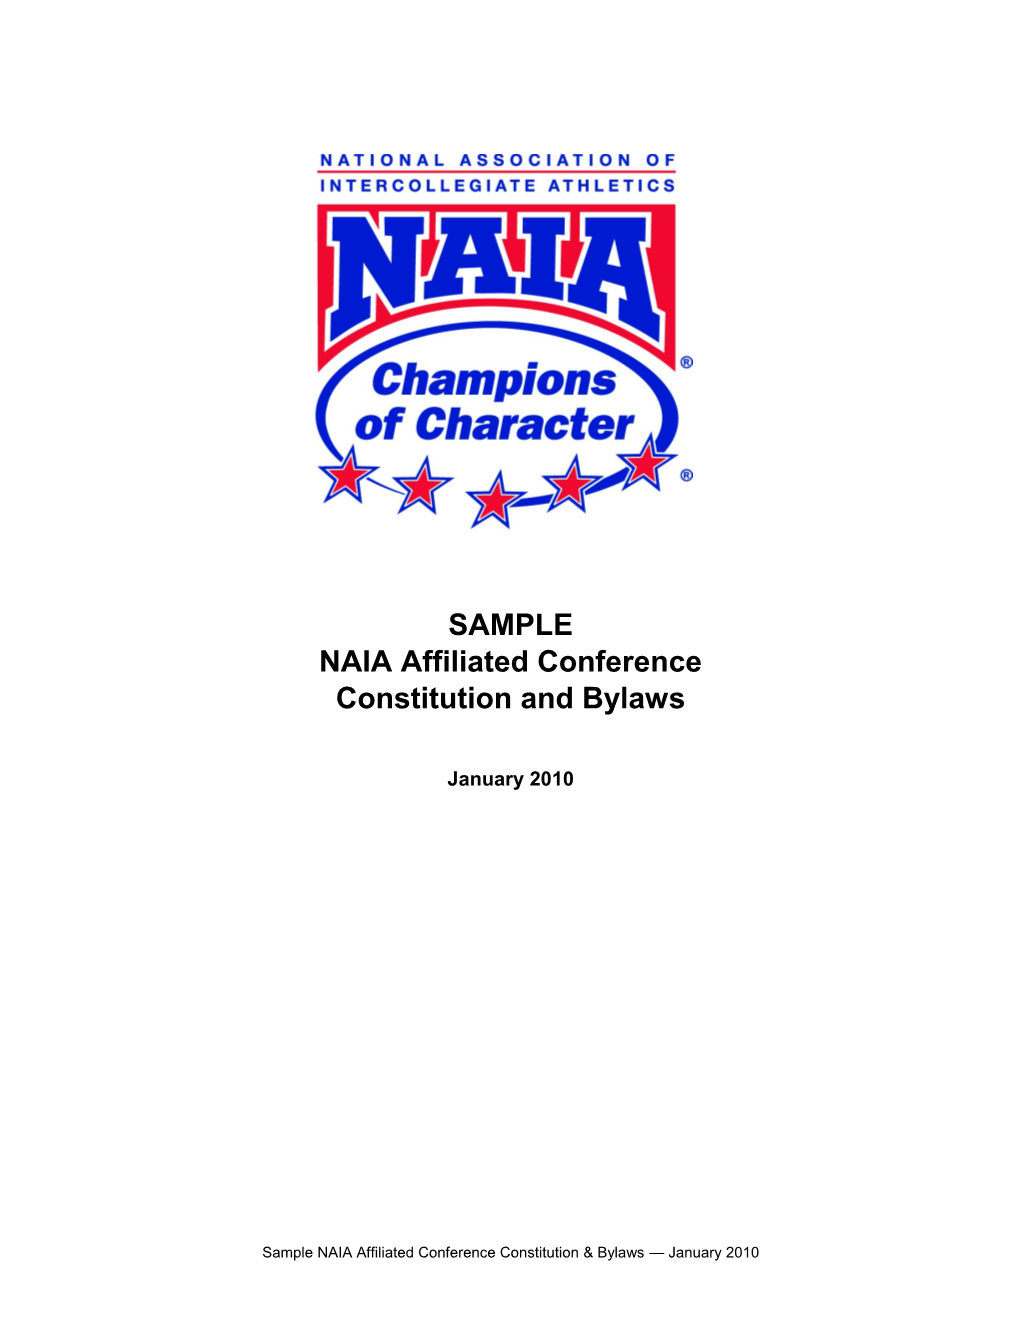 NAIA Affiliated Conference Sample Constitution and Bylaws